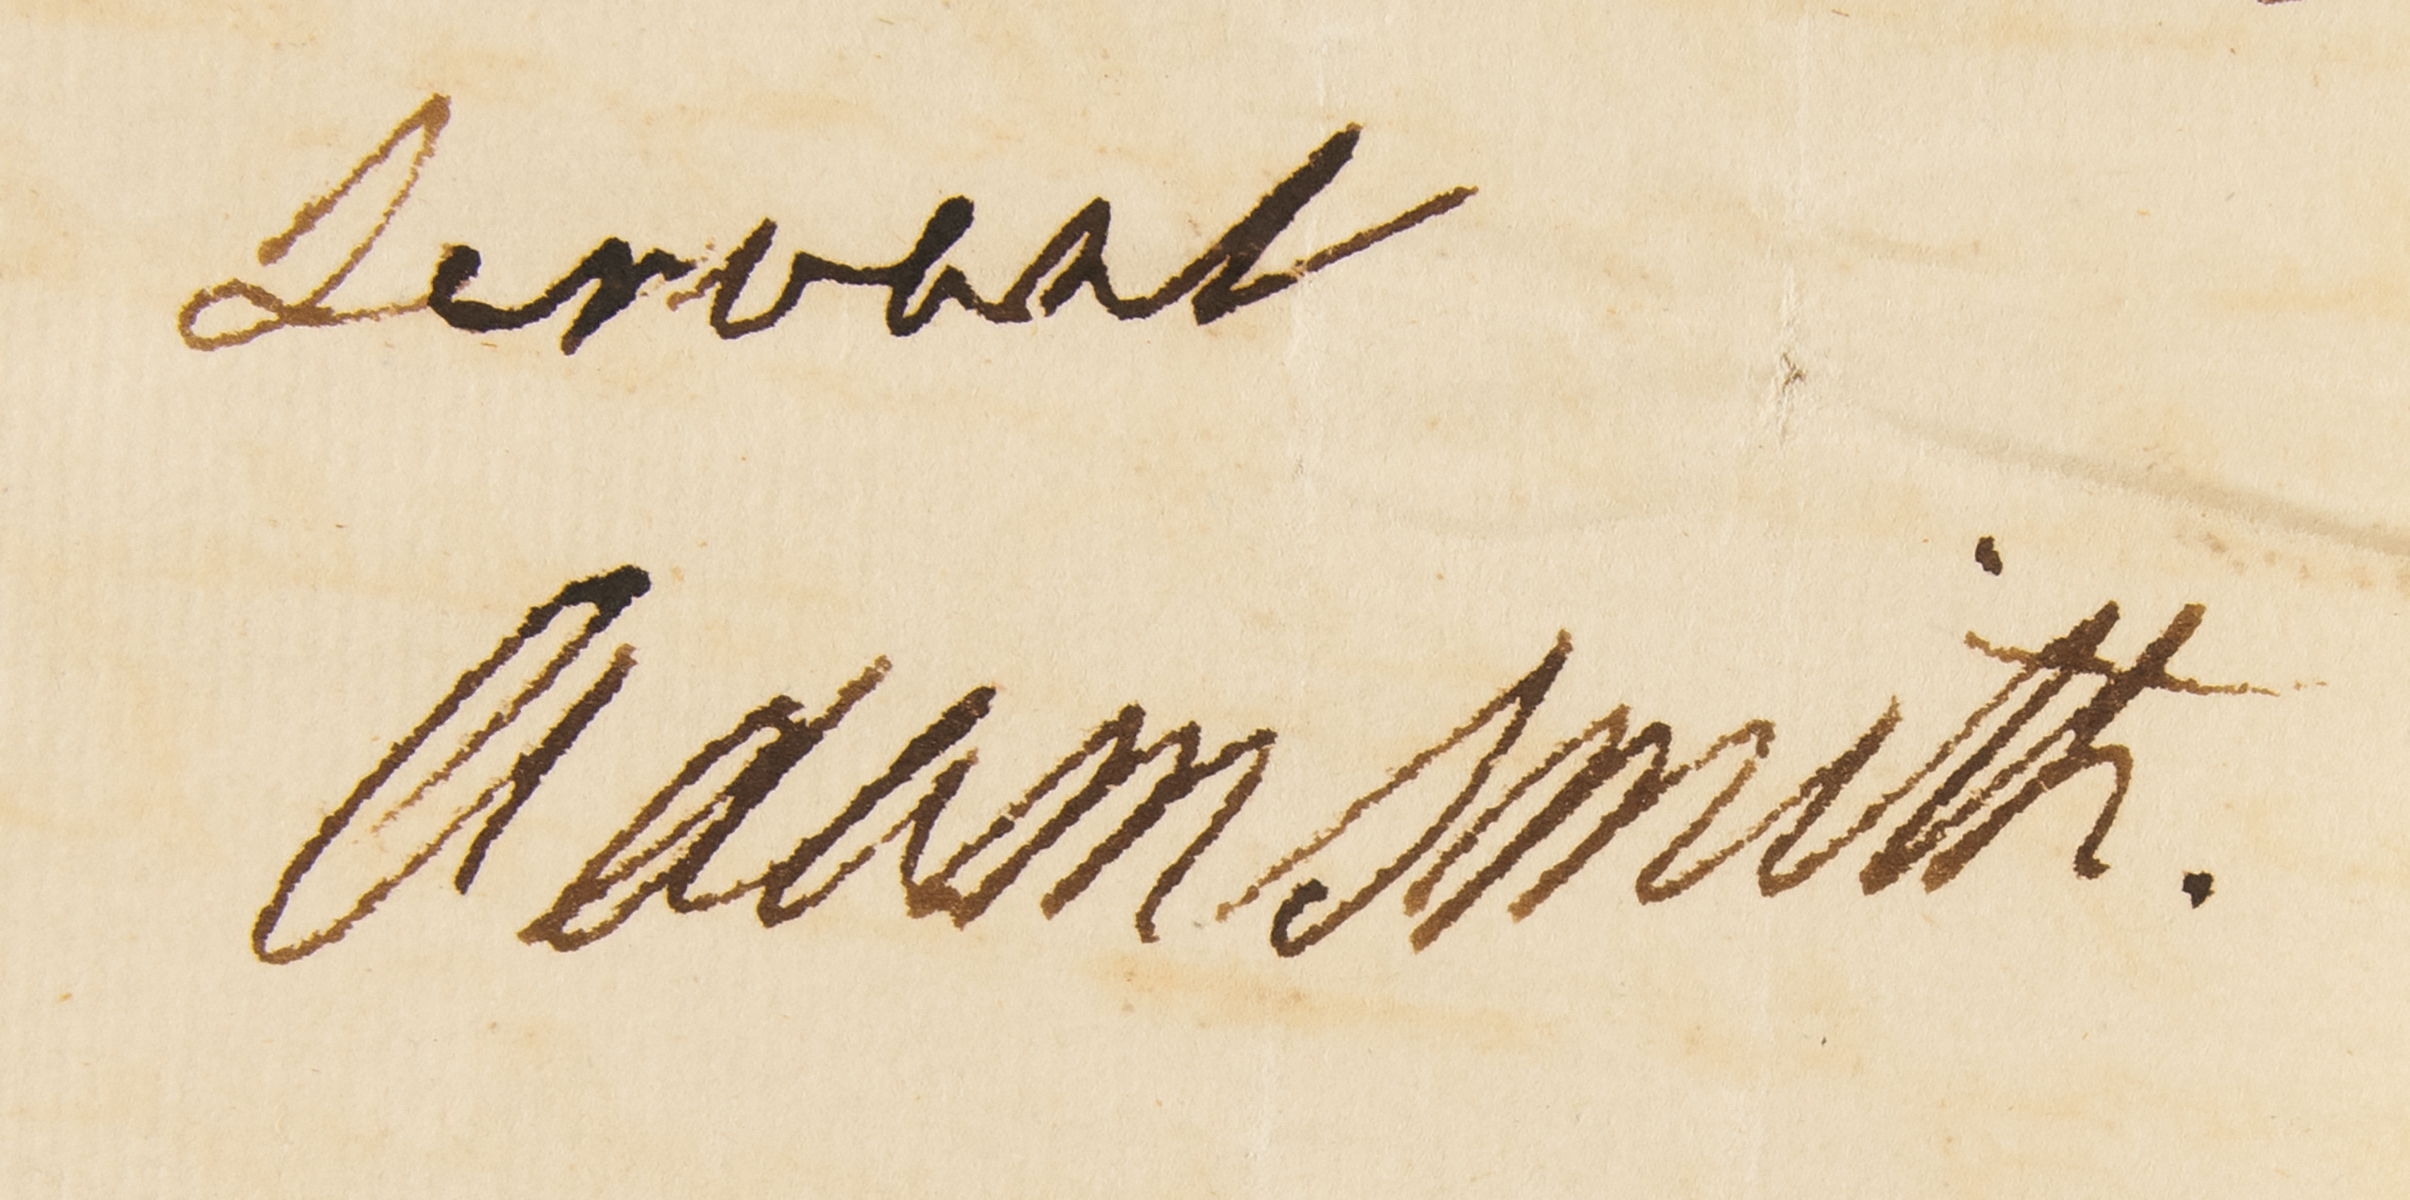 Lot #157 Adam Smith Autograph Letter Signed on a Student's Sickness - One Year After Publishing The Theory of Moral Sentiments - Image 5